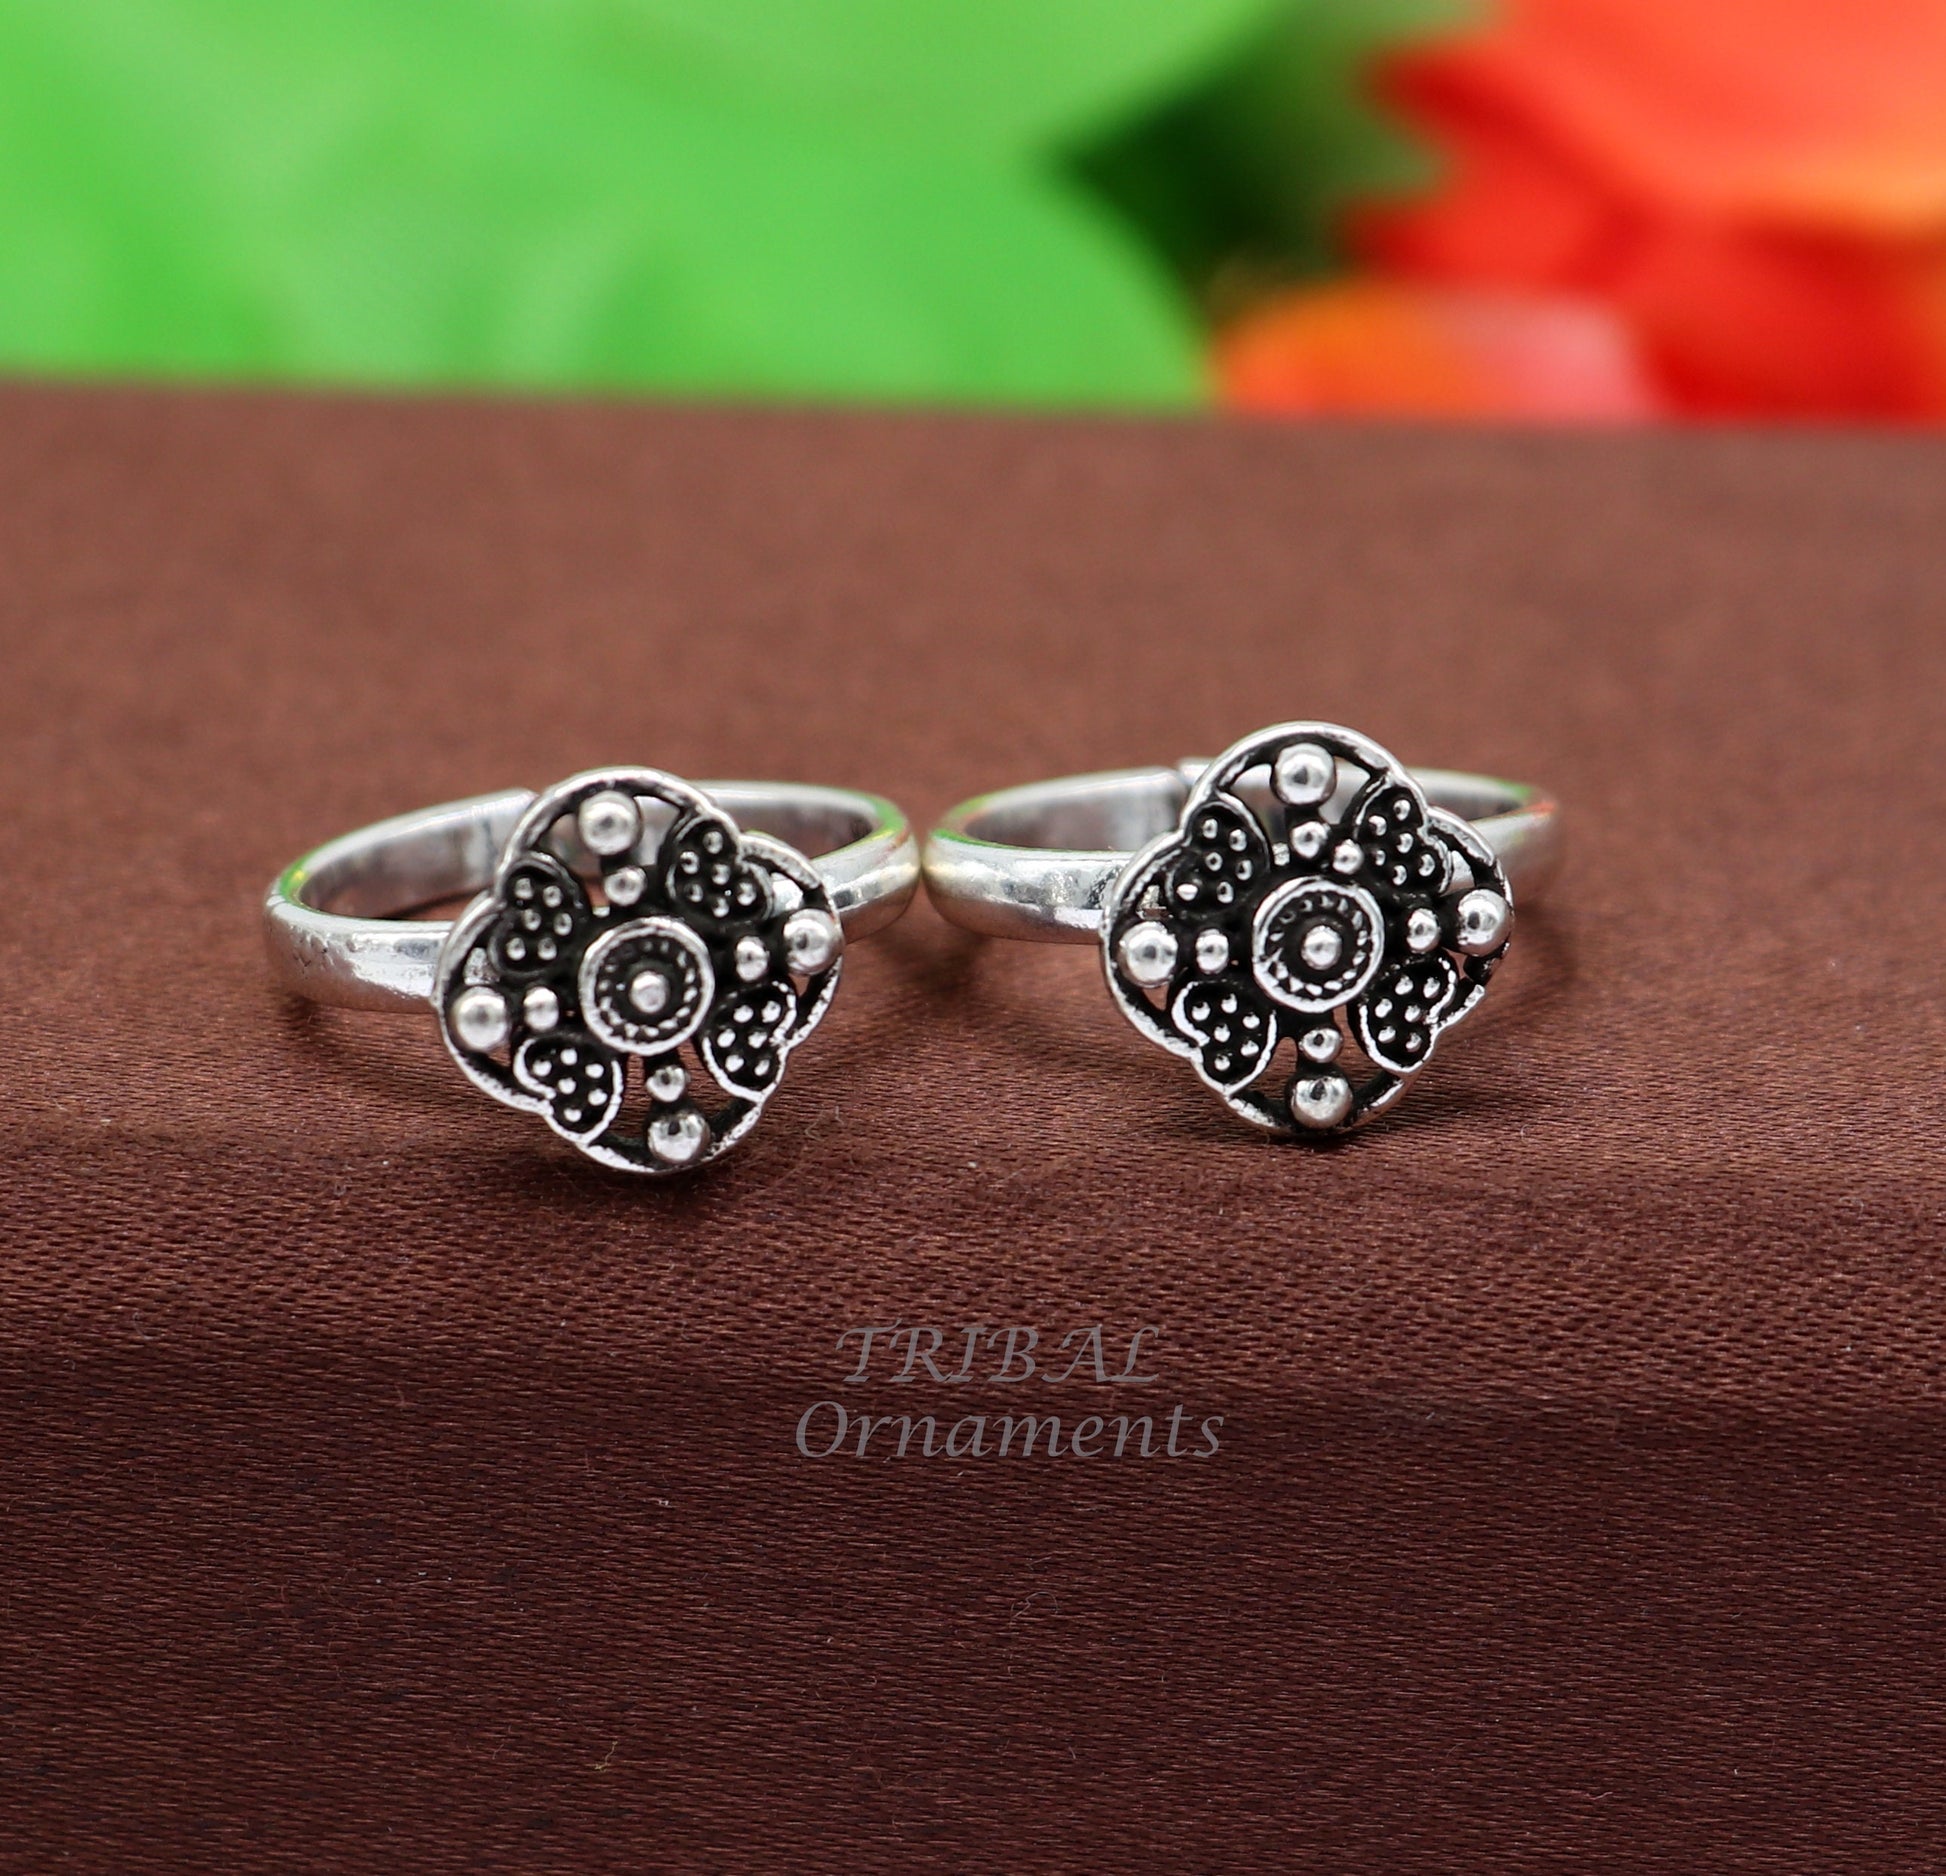 925 sterling silver amazing flower design handmade toe ring, toe band stylish modern women's brides jewelry, india traditional jewelry ytr53 - TRIBAL ORNAMENTS